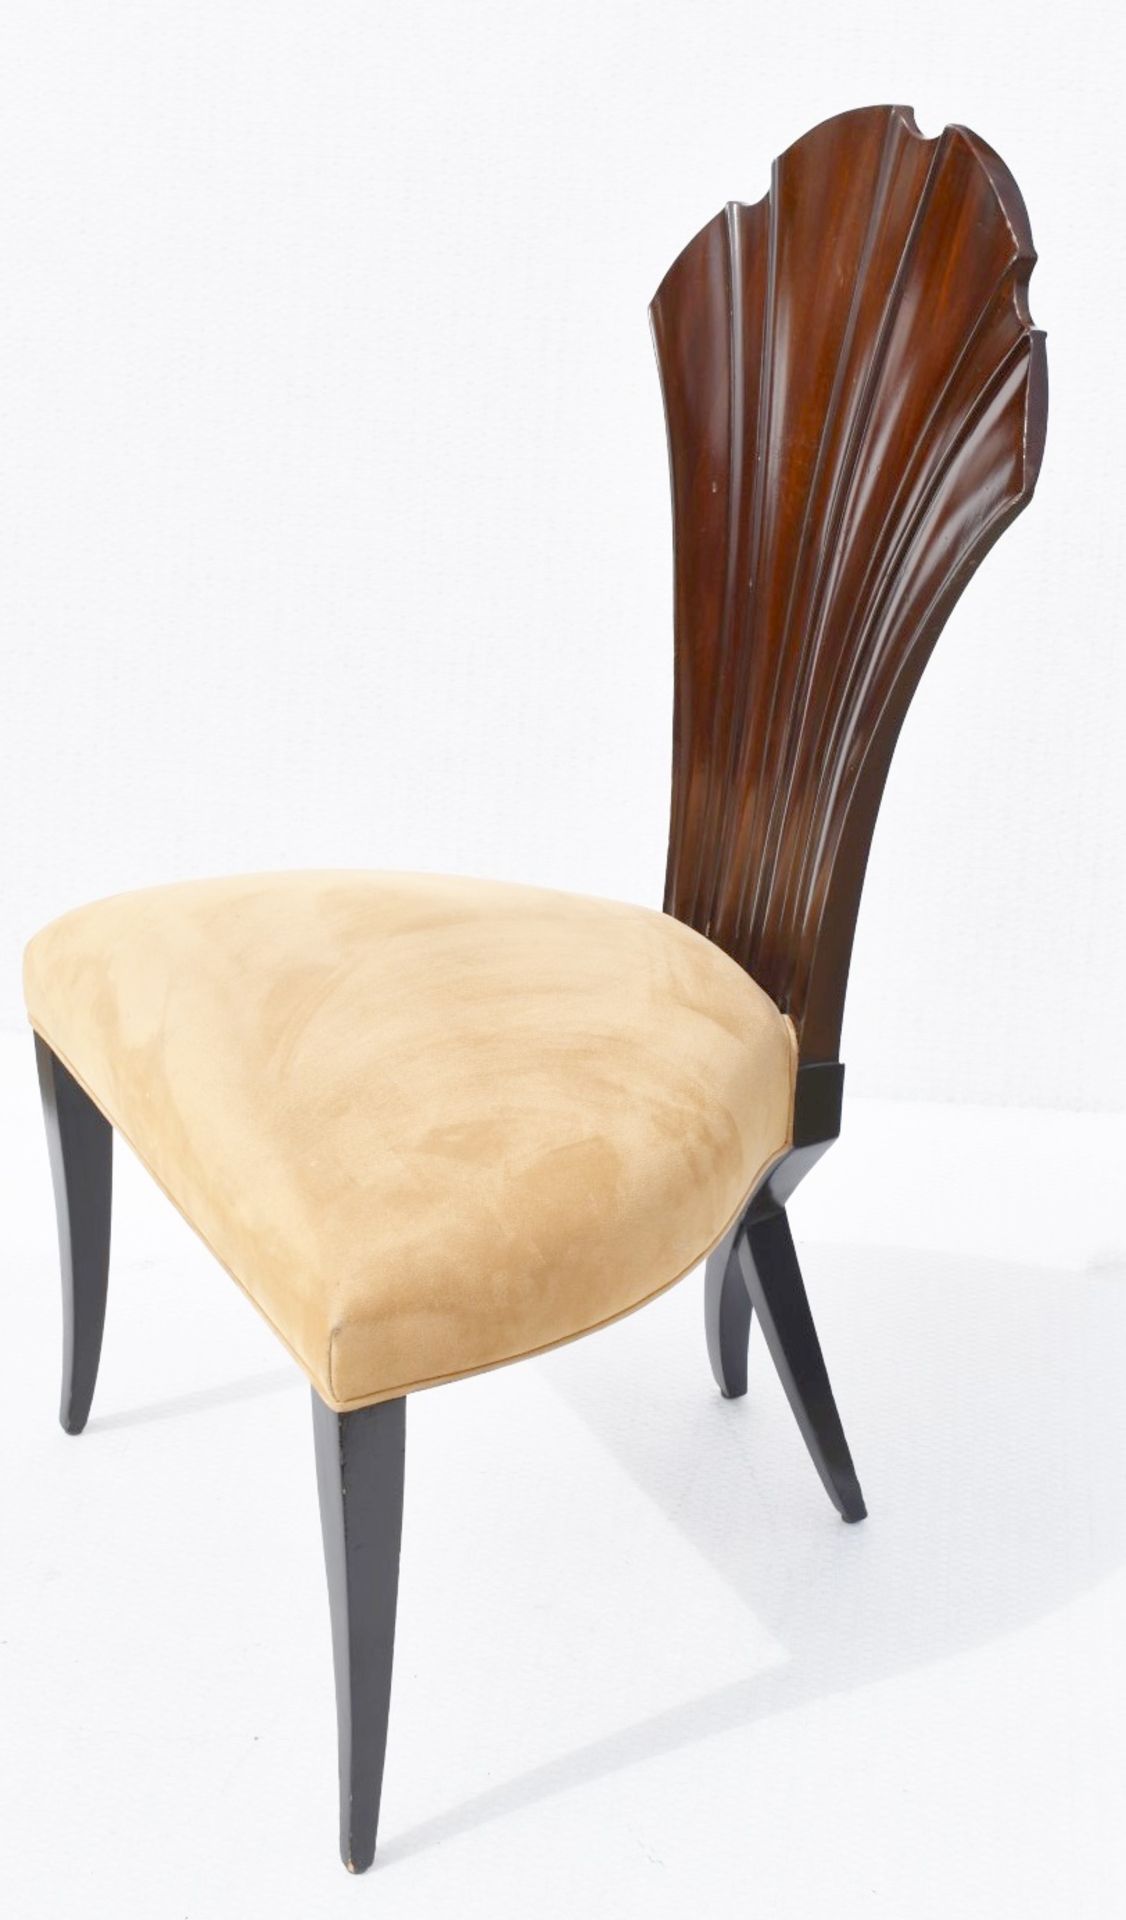 4 x CHRISTOPHER GUY 'La Croisette' Luxury Hand-carved Solid Mahogany Designer Dining Chairs - - Image 2 of 11